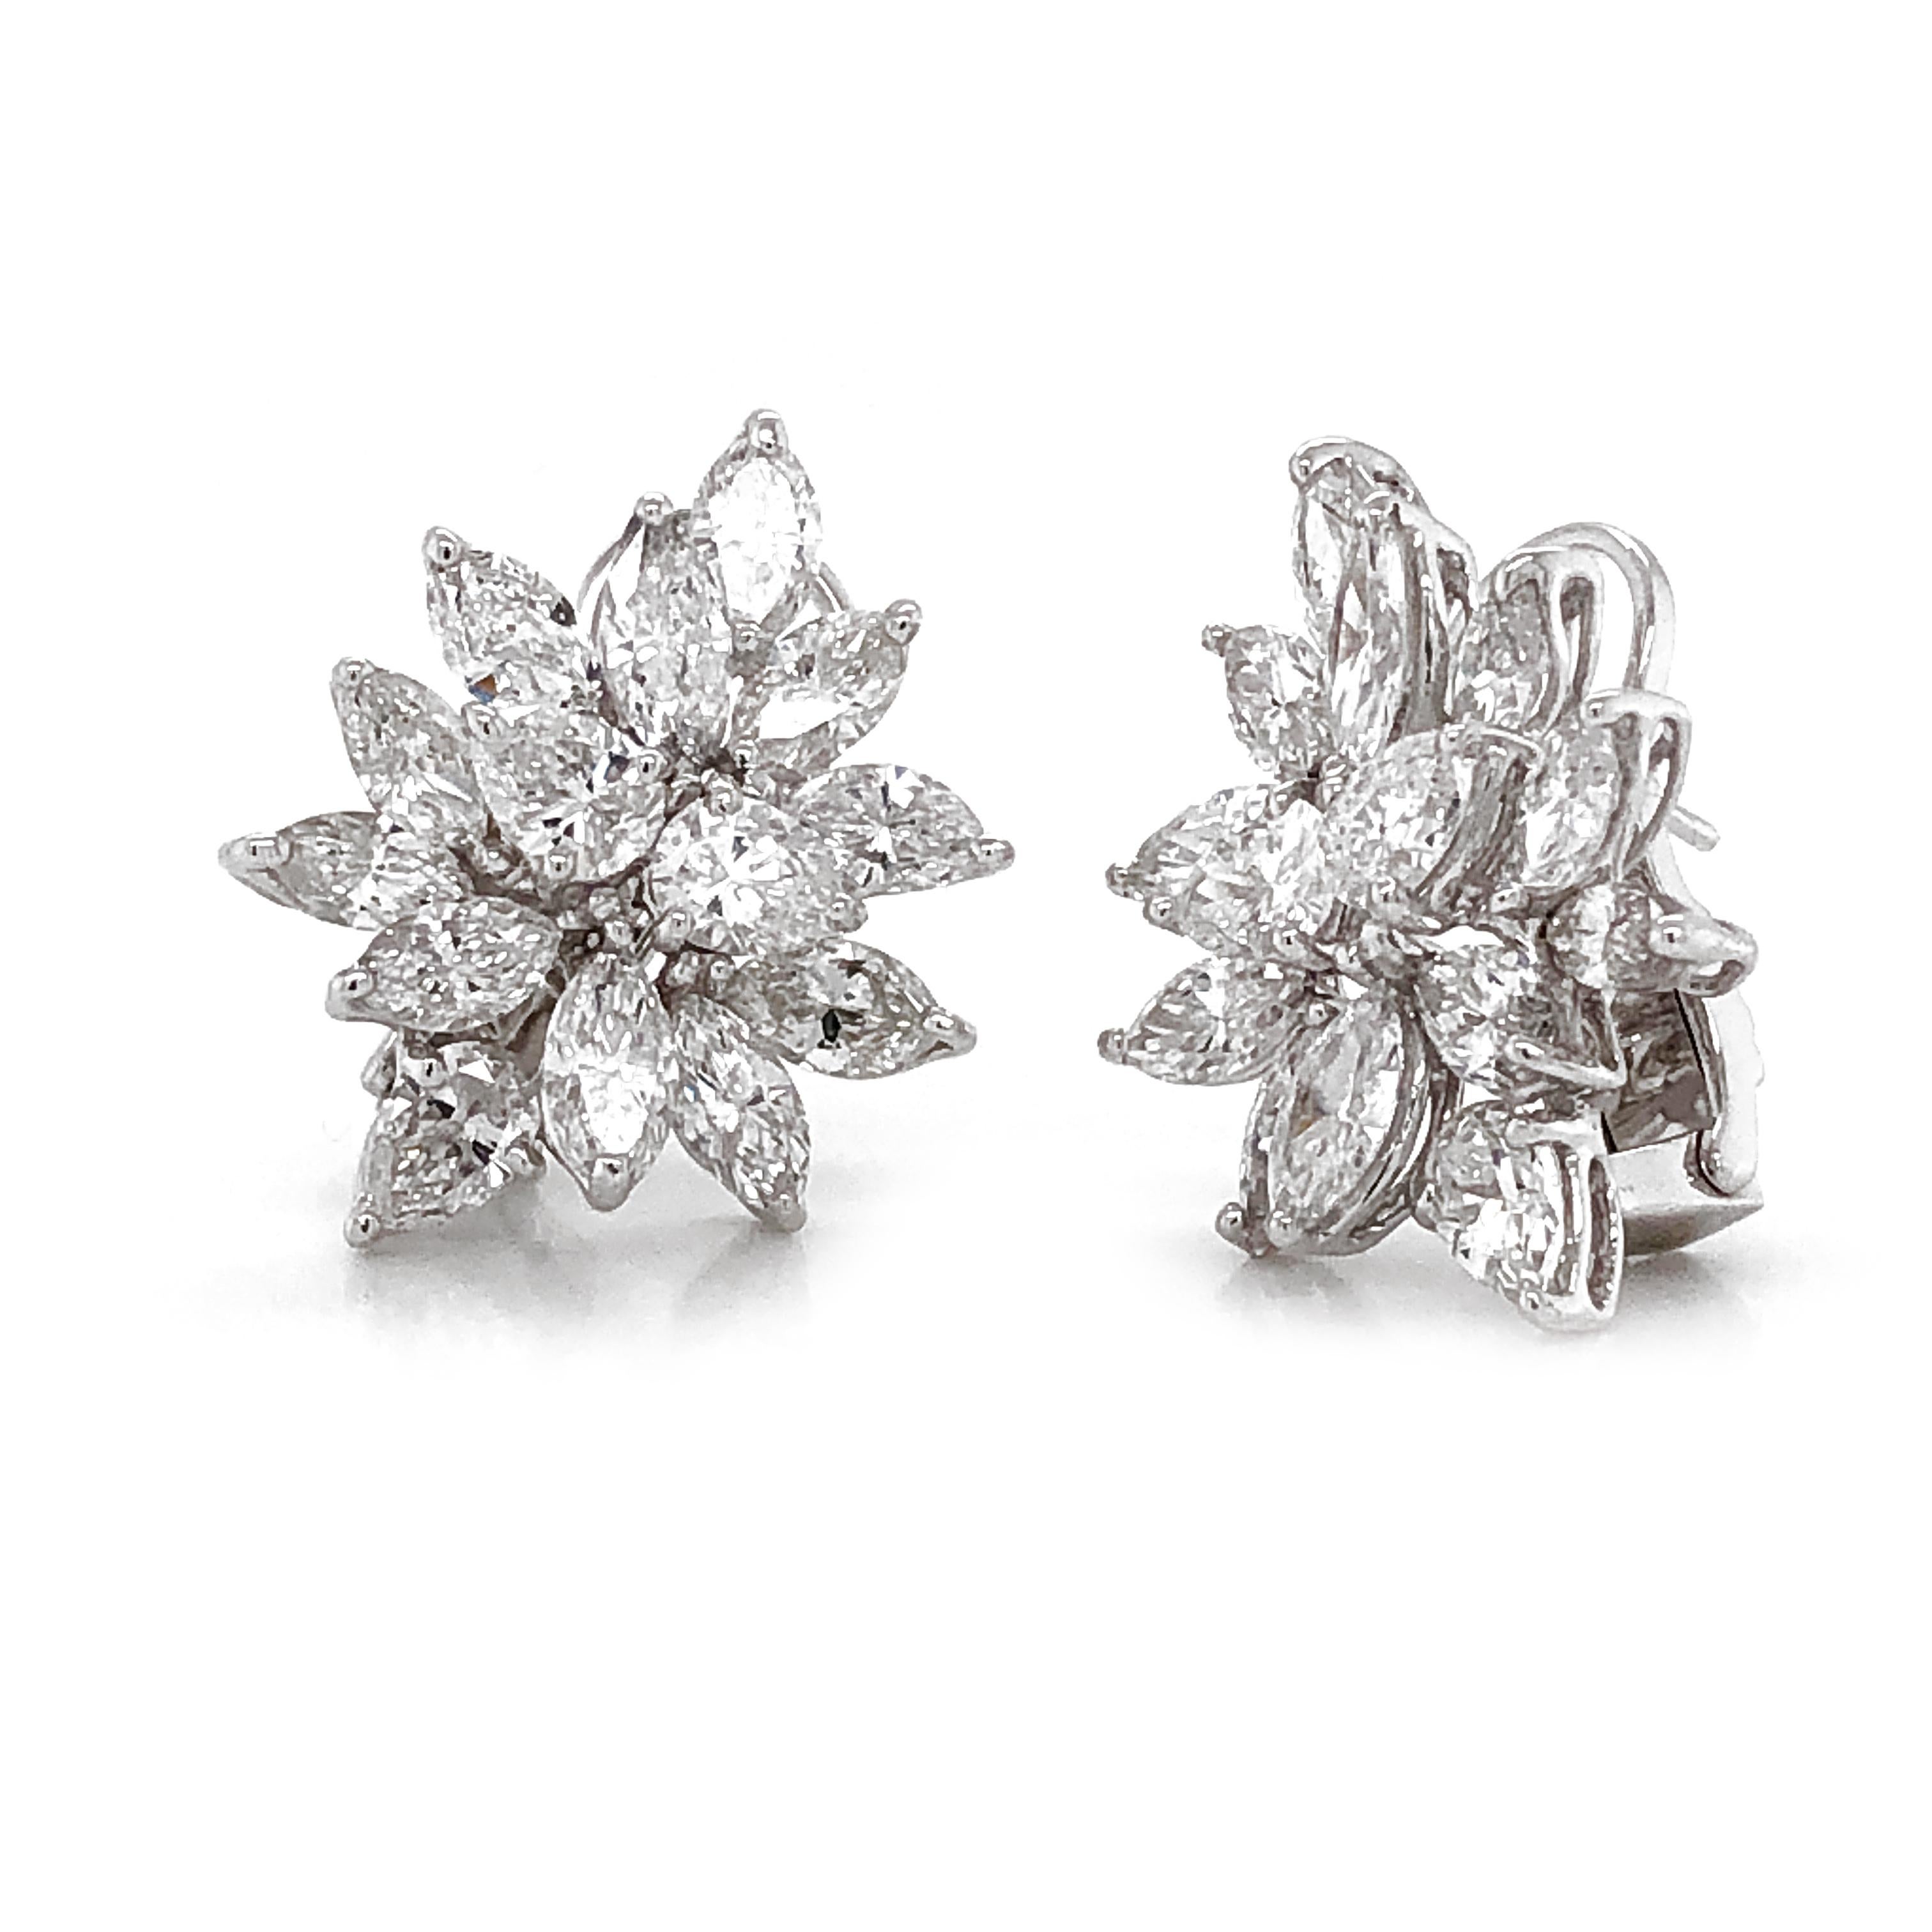 Elegant diamond platinum earrings with a cluster of brilliant pear cut diamonds 10.63 carat total. 
Diamonds are white and natural and in G-H Color Clarity VS.
Platinum 950 metal.
French  Omega clips.
Contemporary elegant style.
Length: 2.5